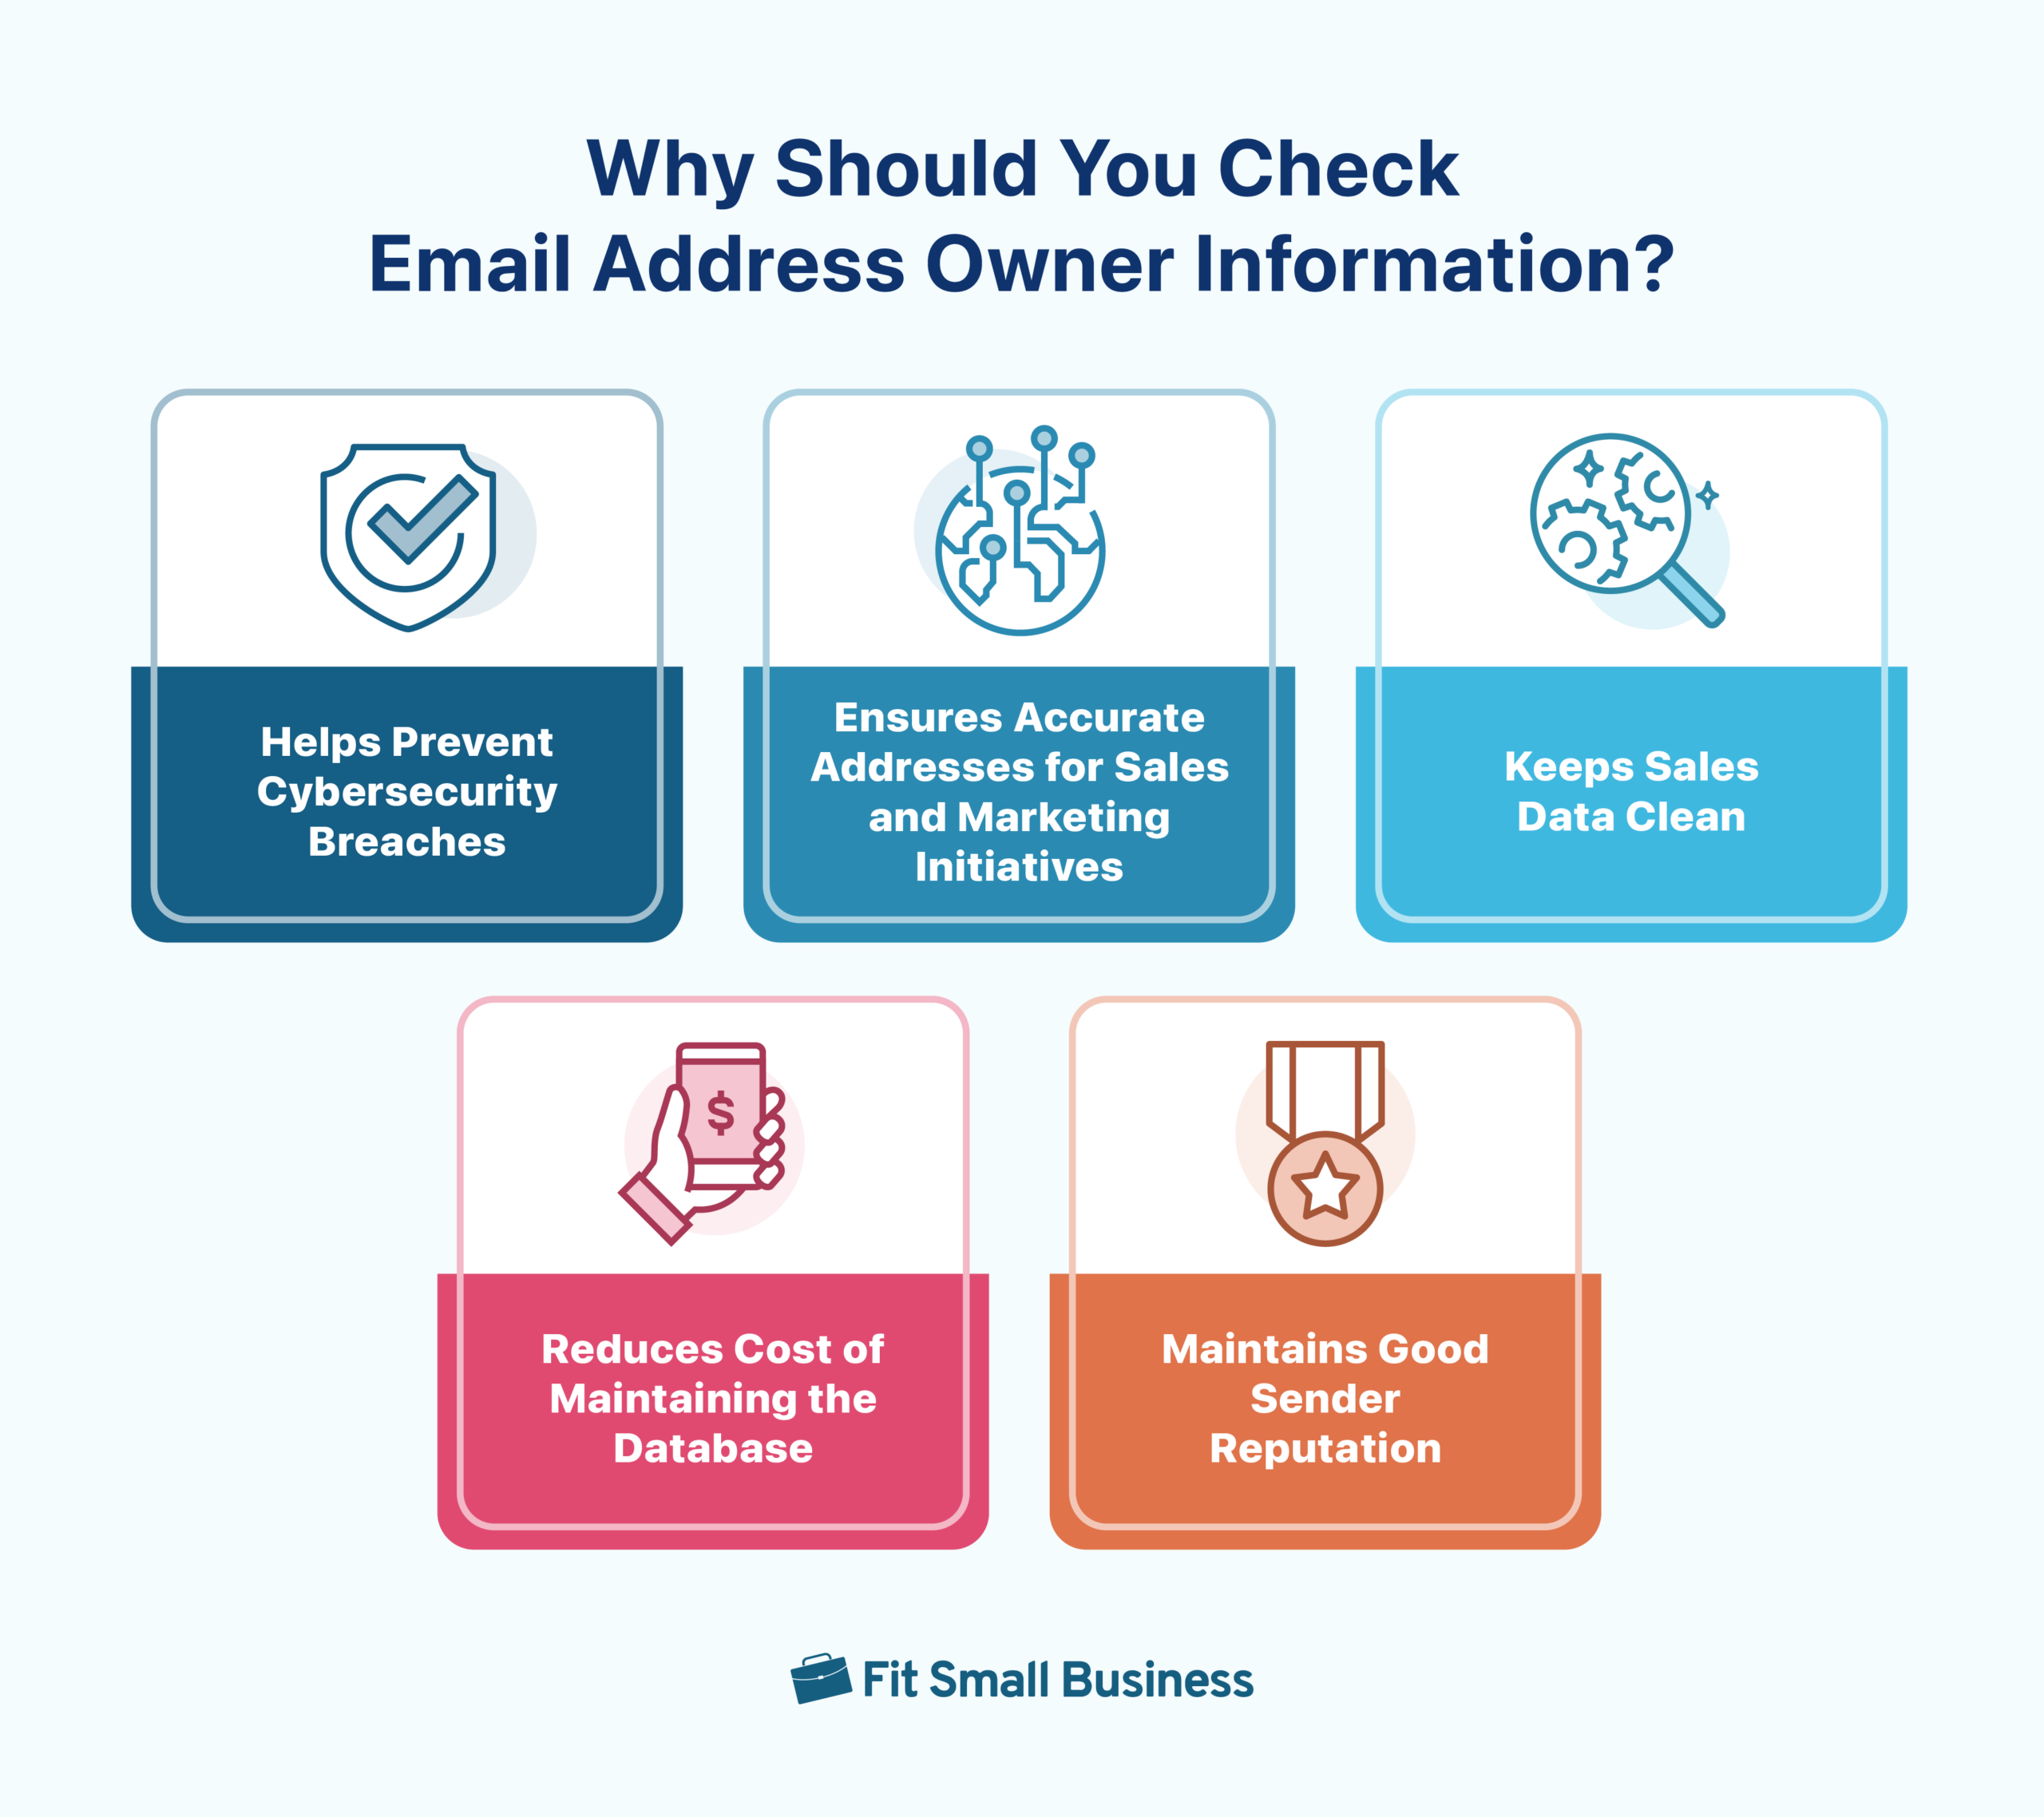 An infographic showing several reasons why you should check email address owner information.